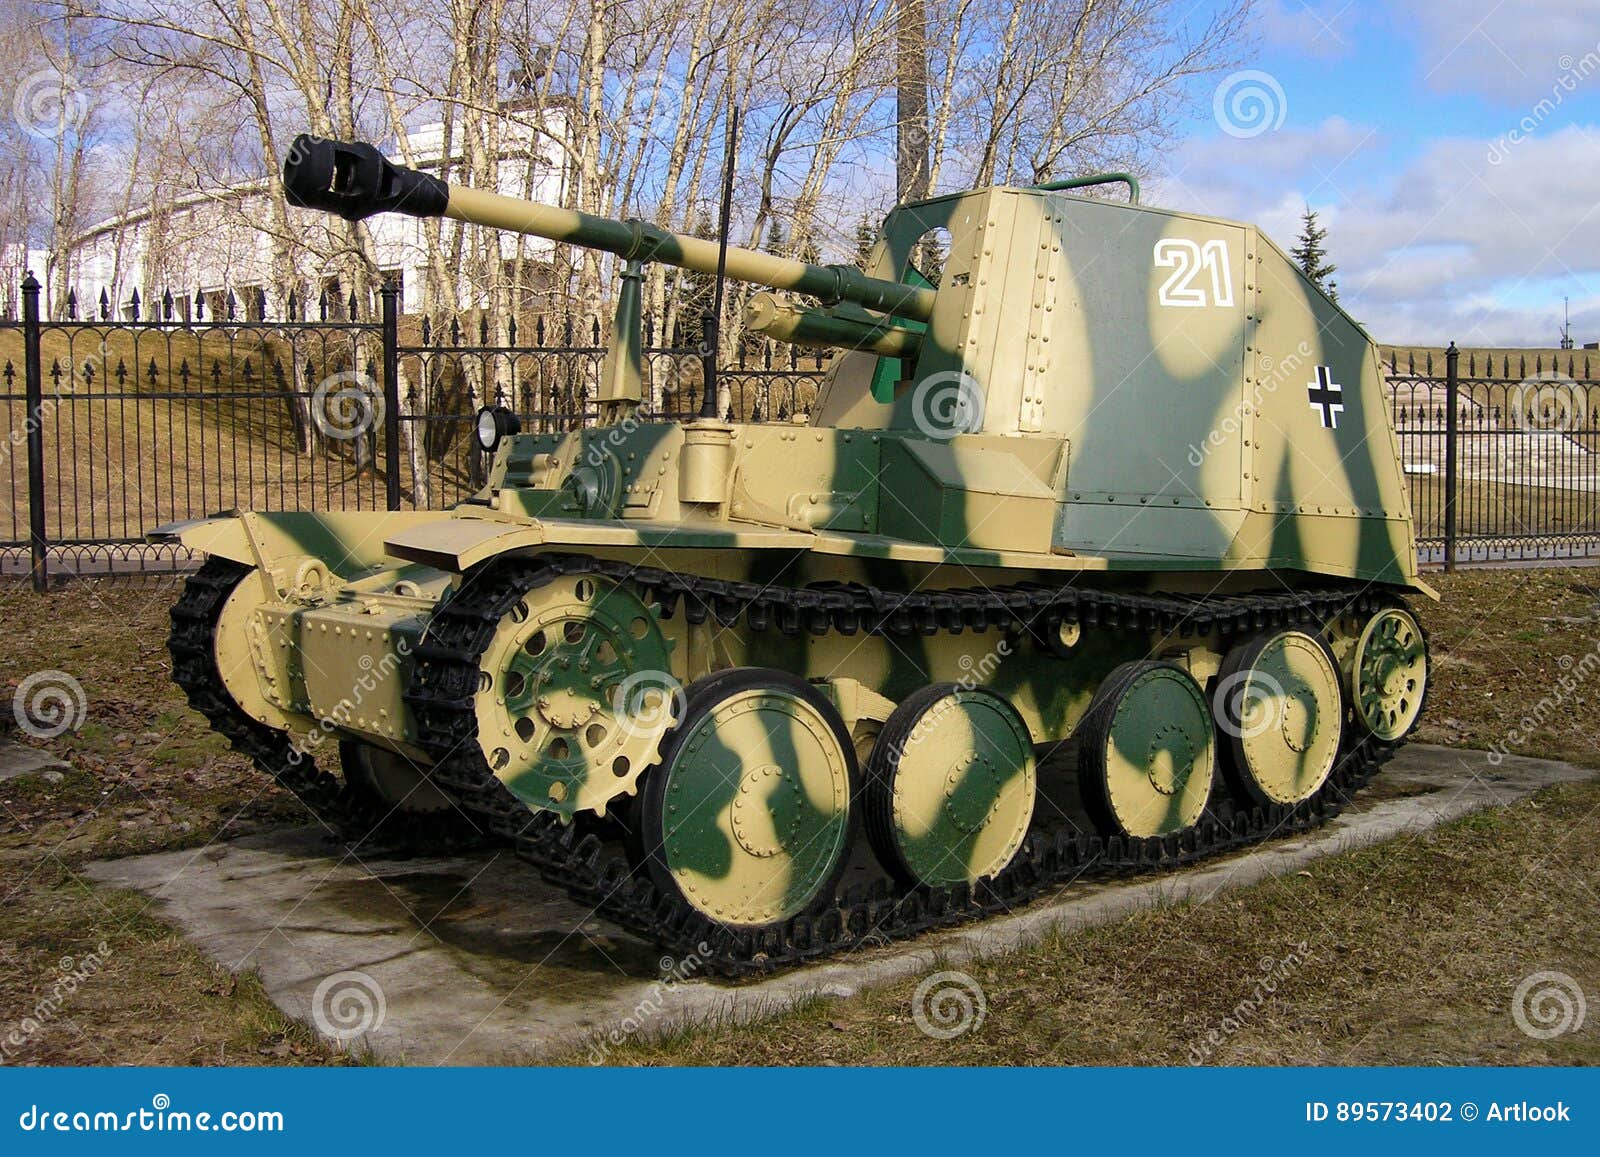 The 75 Mm 38M Marder Self-Propelled Anti-Tank Gun Germany Stock Photo -  Image of germany, marder: 89573402